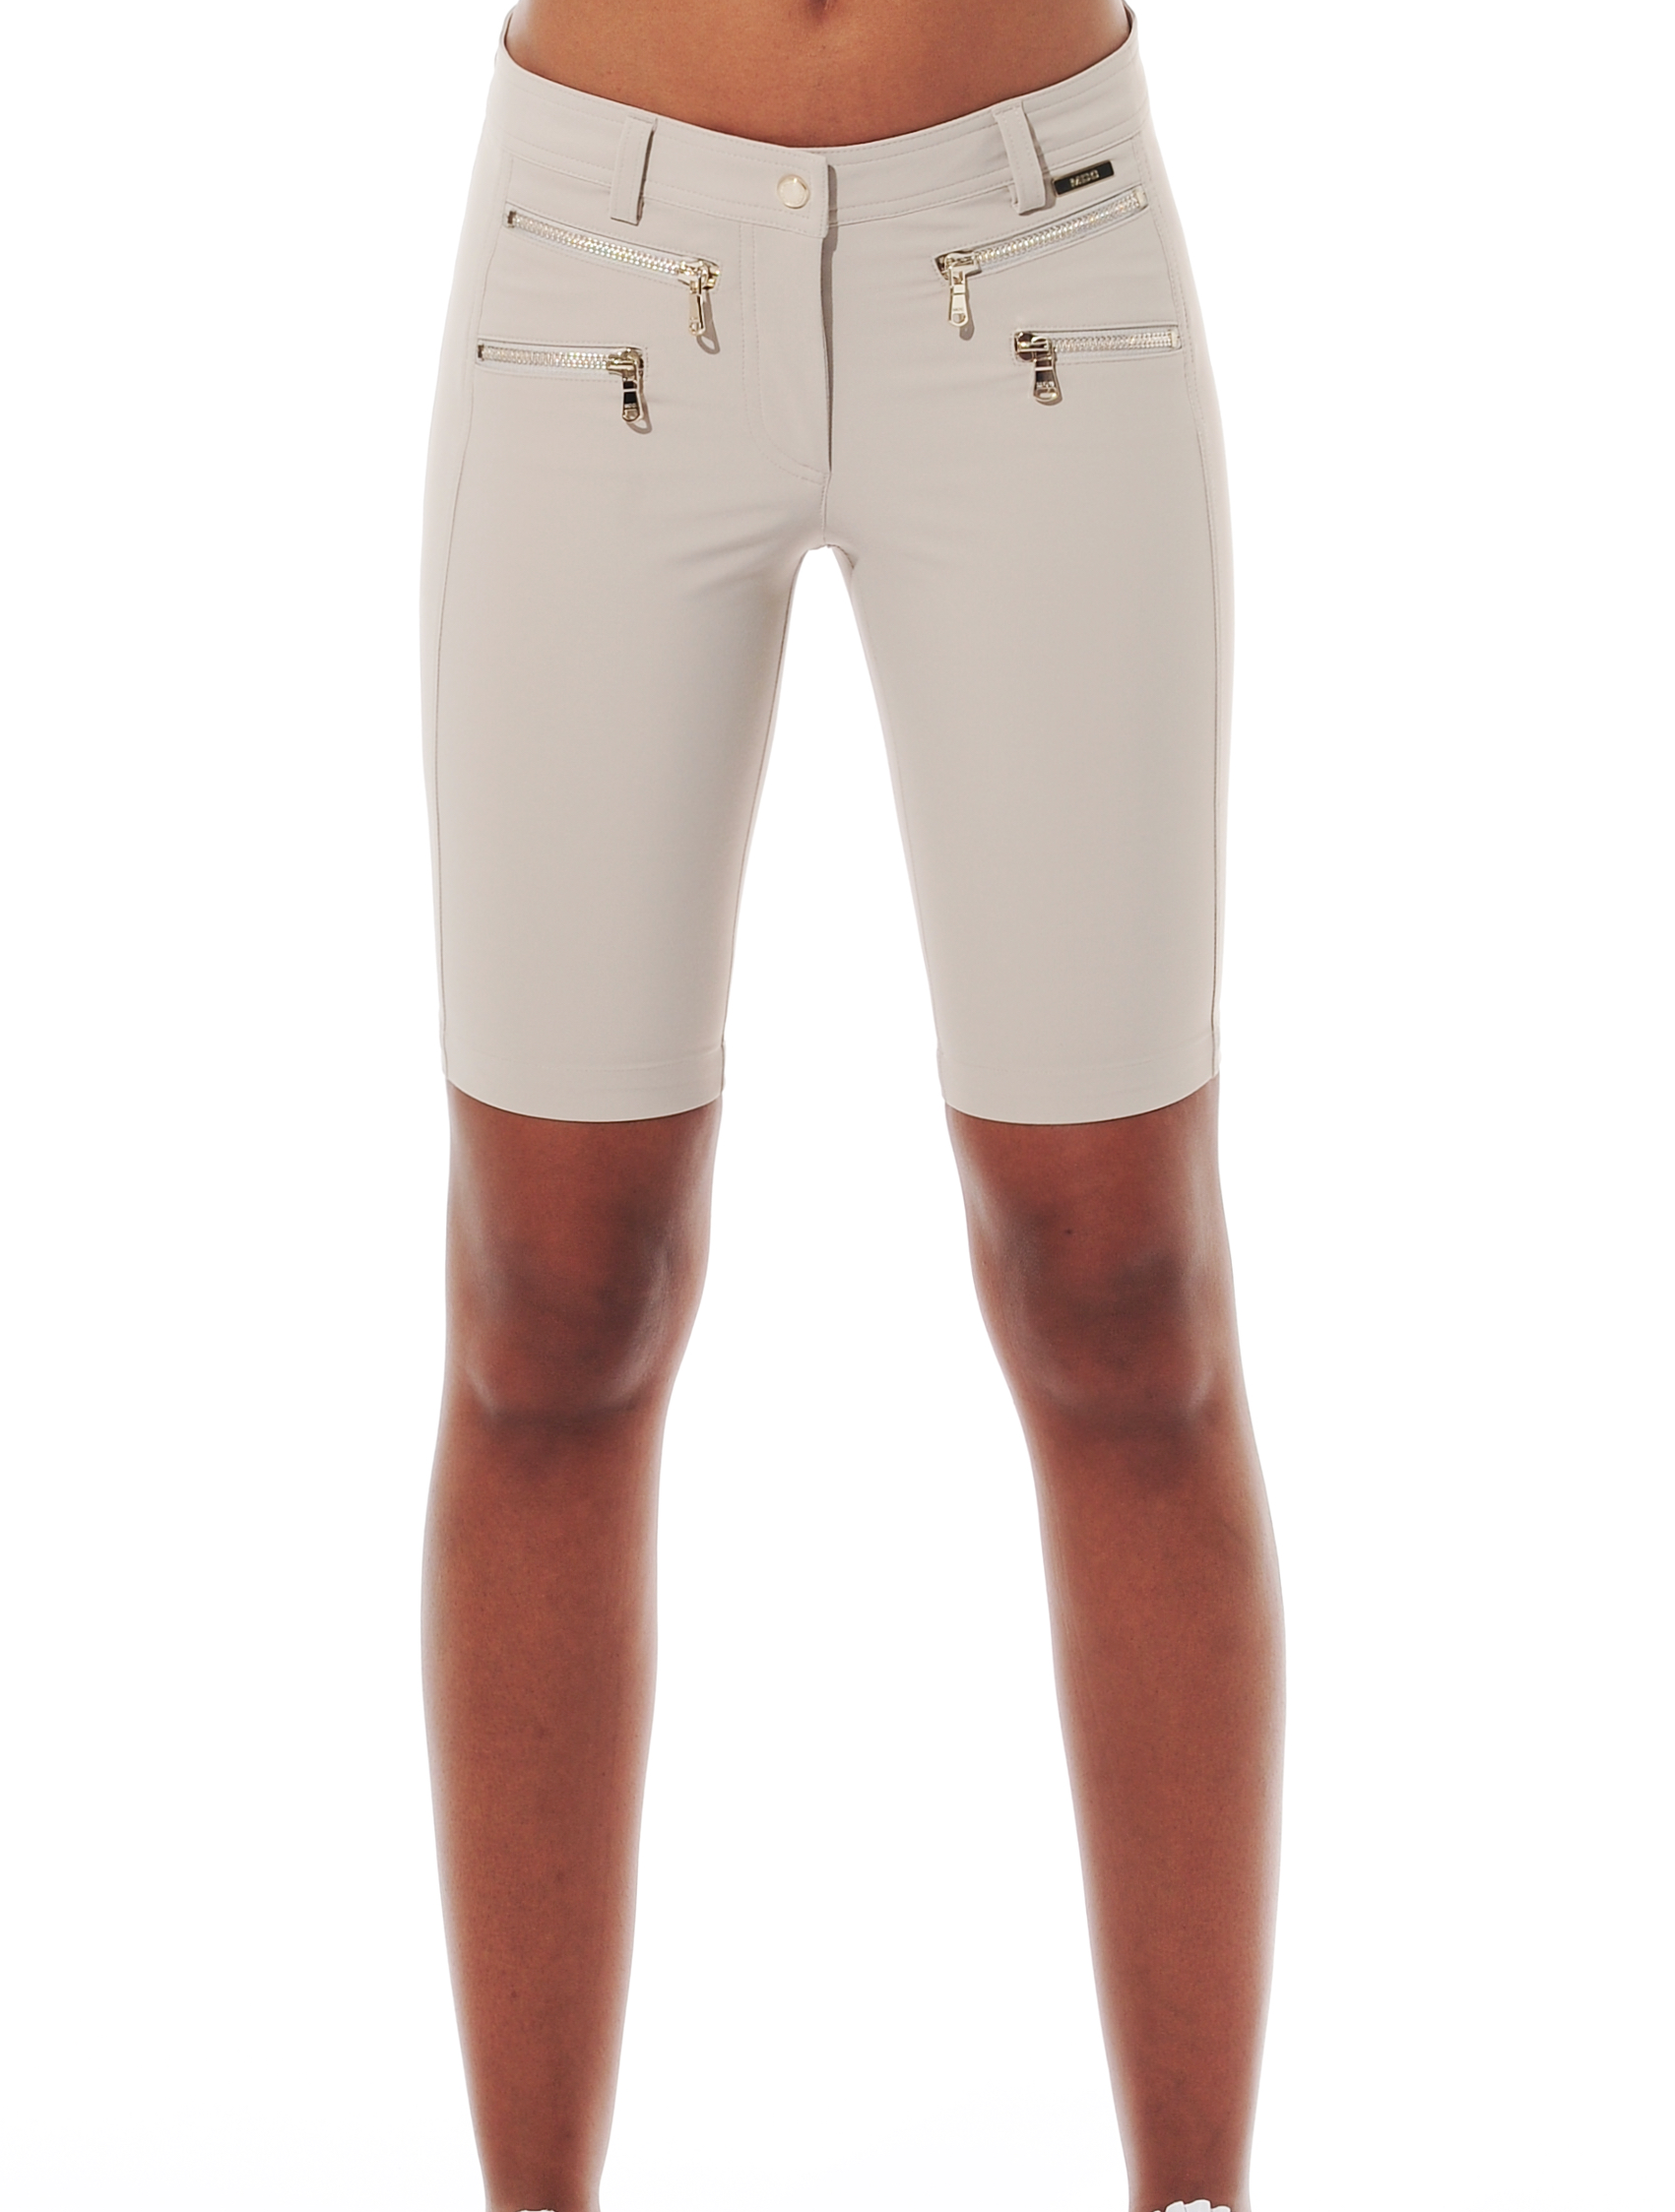 4way stretch double zip shorts light taupe 